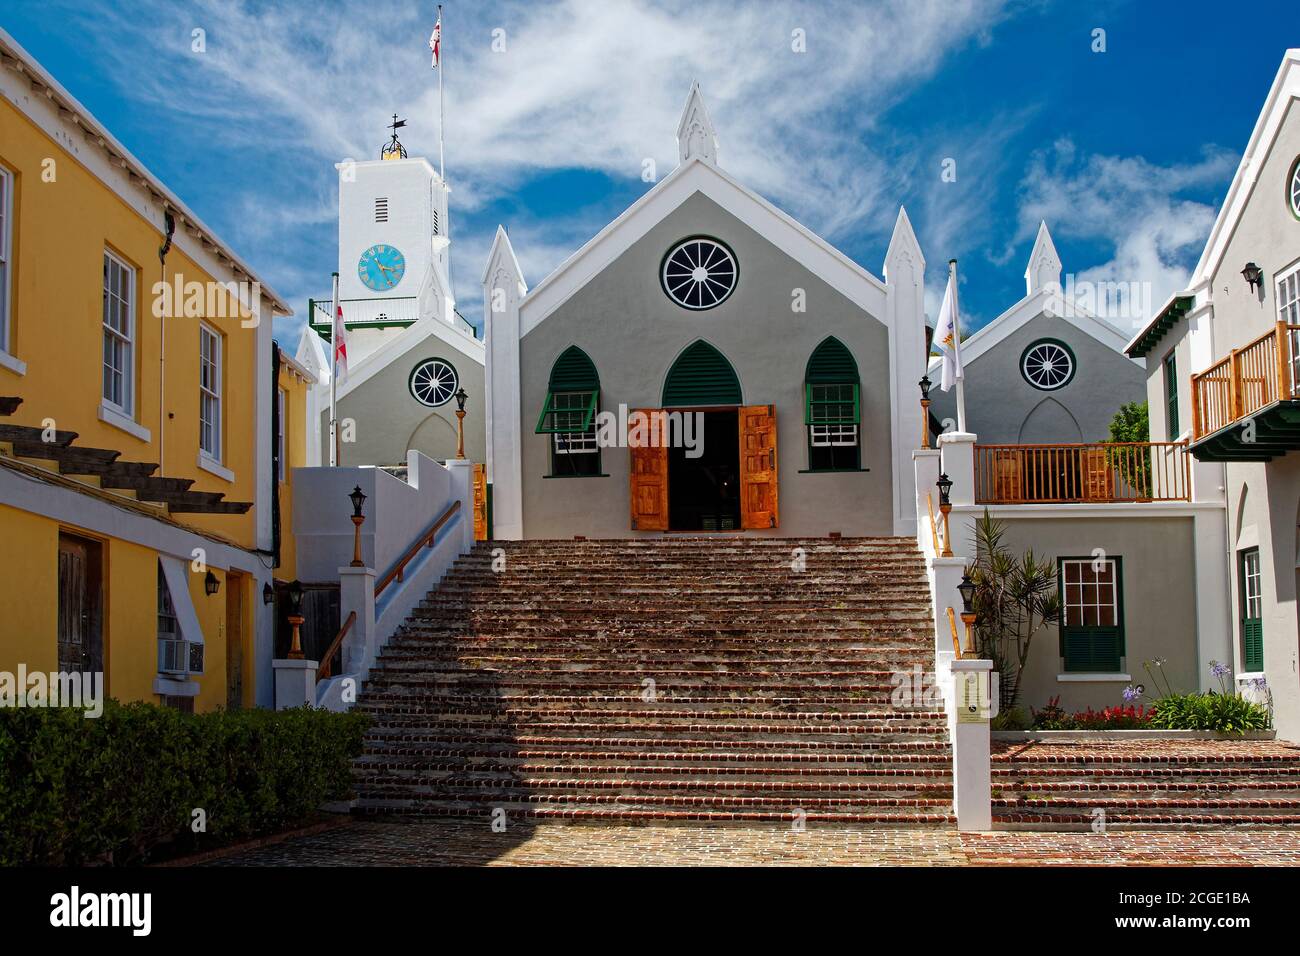 St. Peter's, Their Majesties Chappell, religious building, Anglican church, long flight brick steps, 17th century, old, St. George, Bermuda Stock Photo